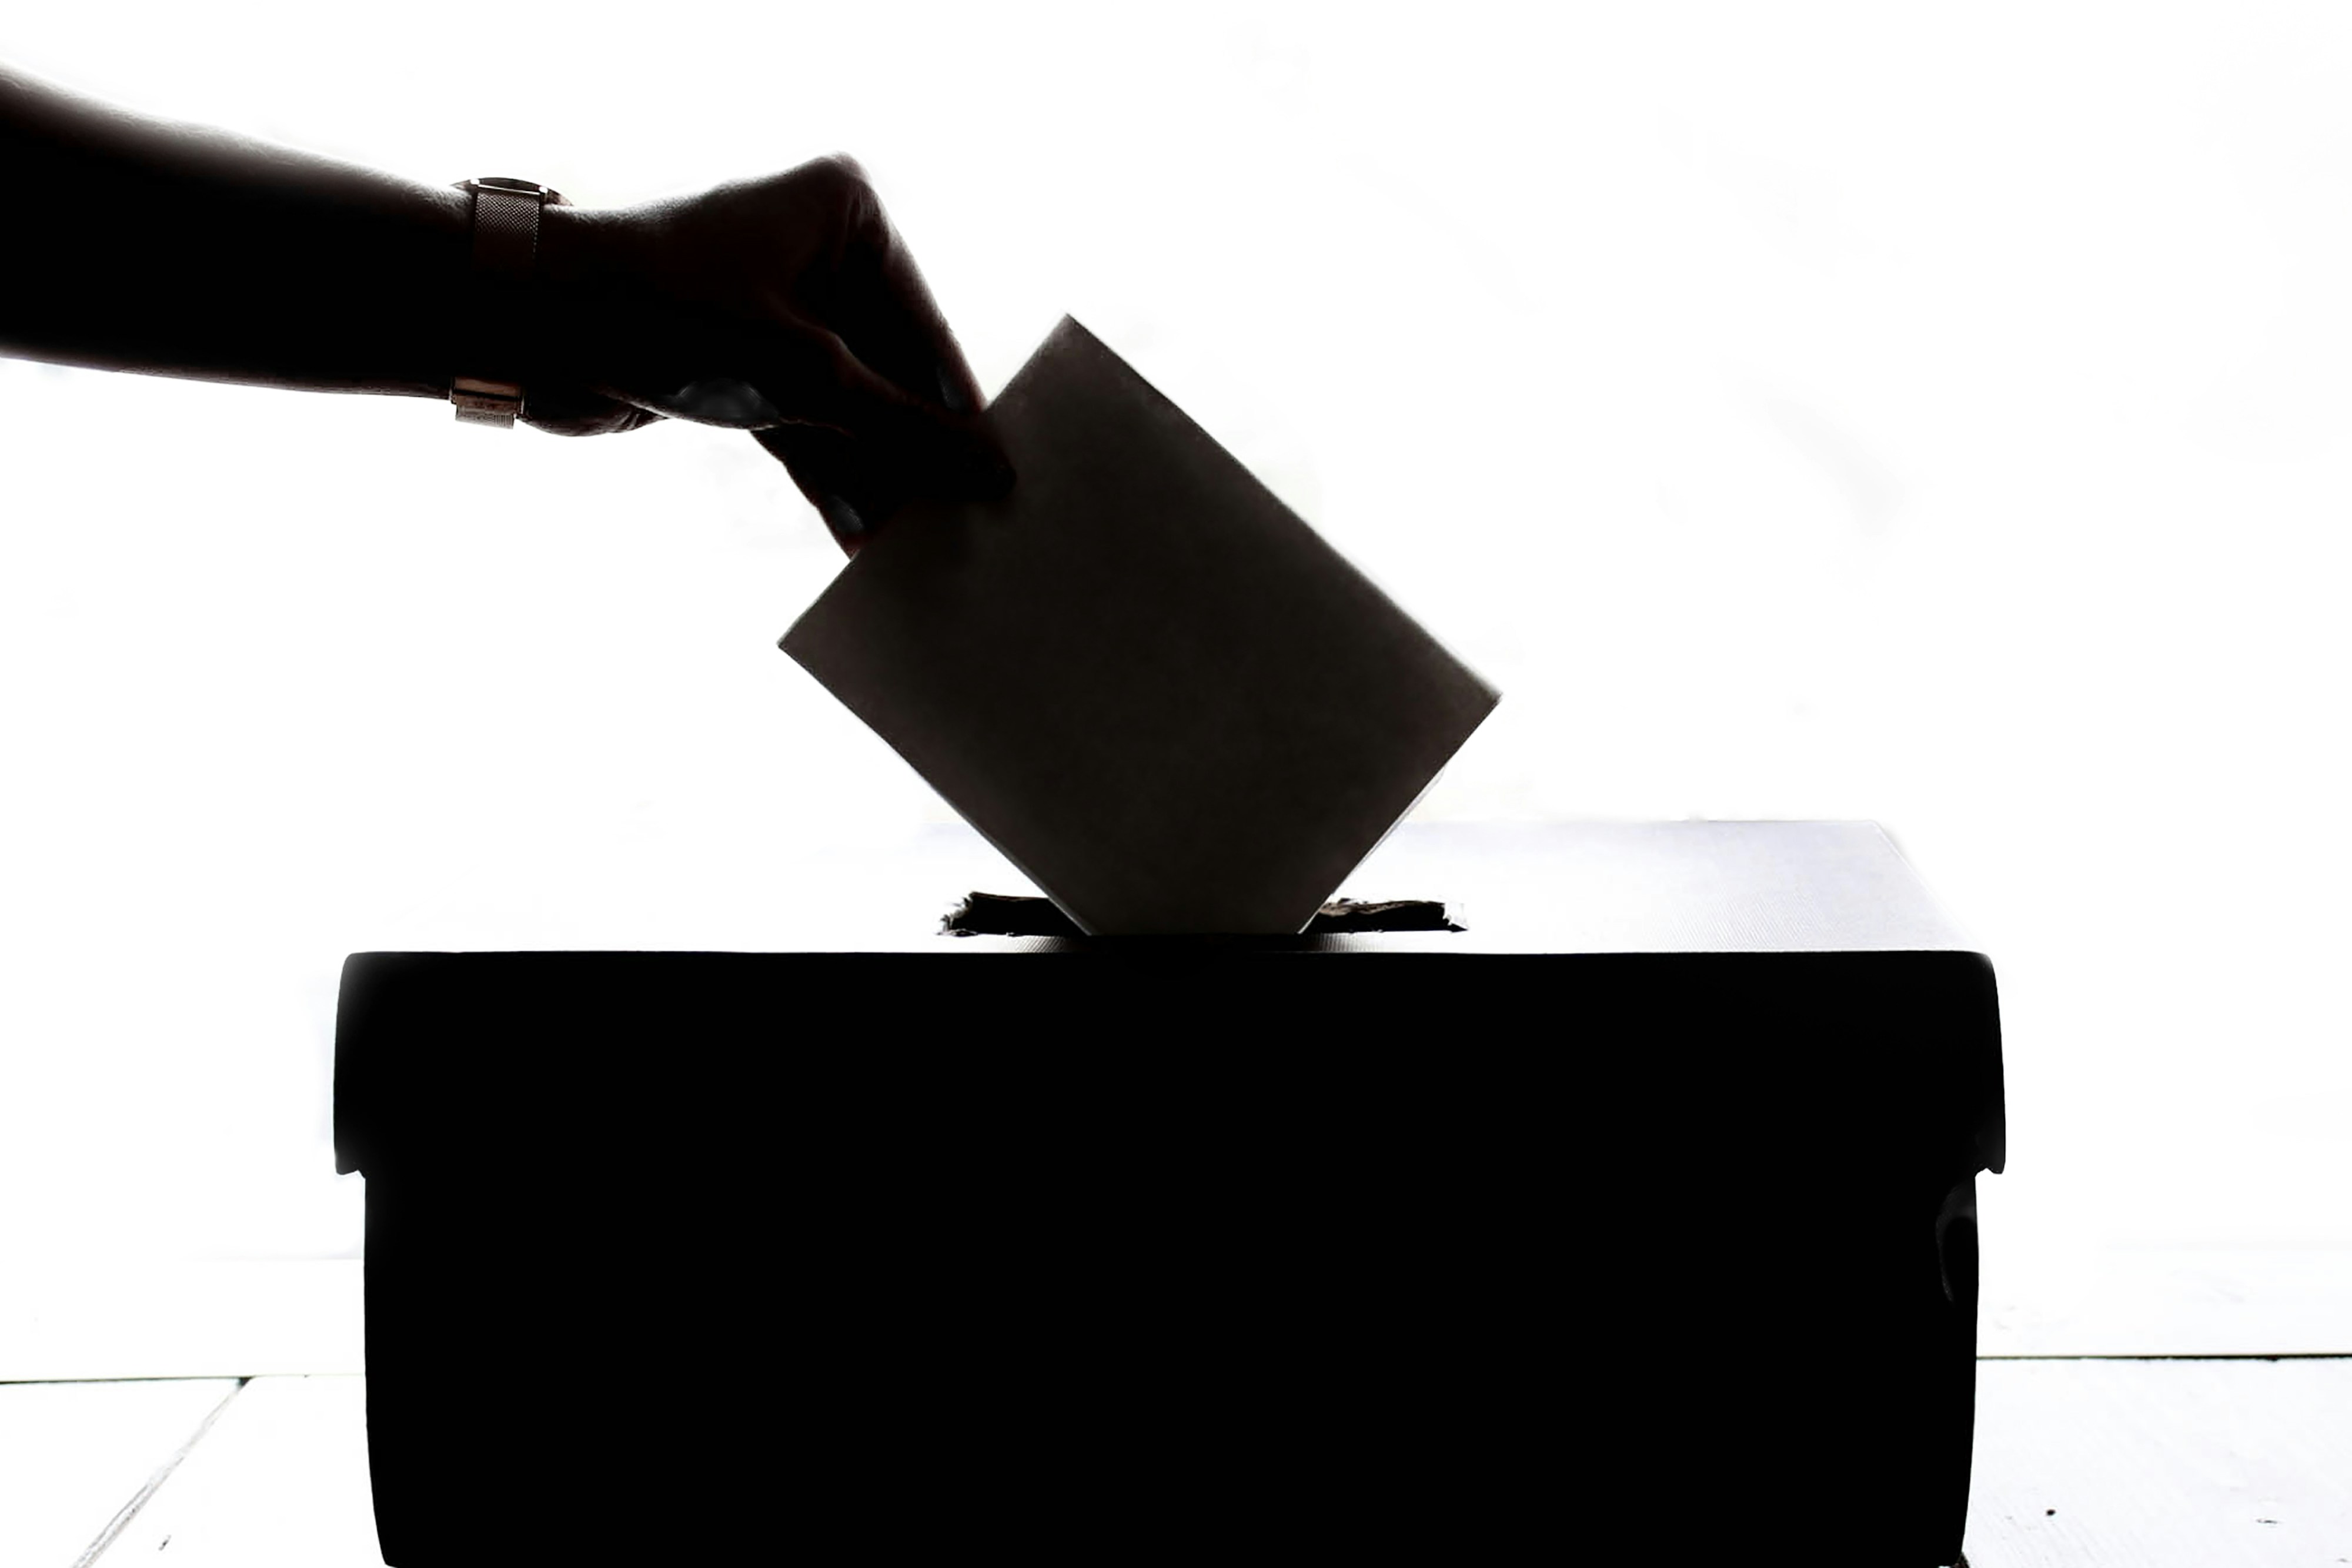 Silhouette of a hand posting a voting card into a box